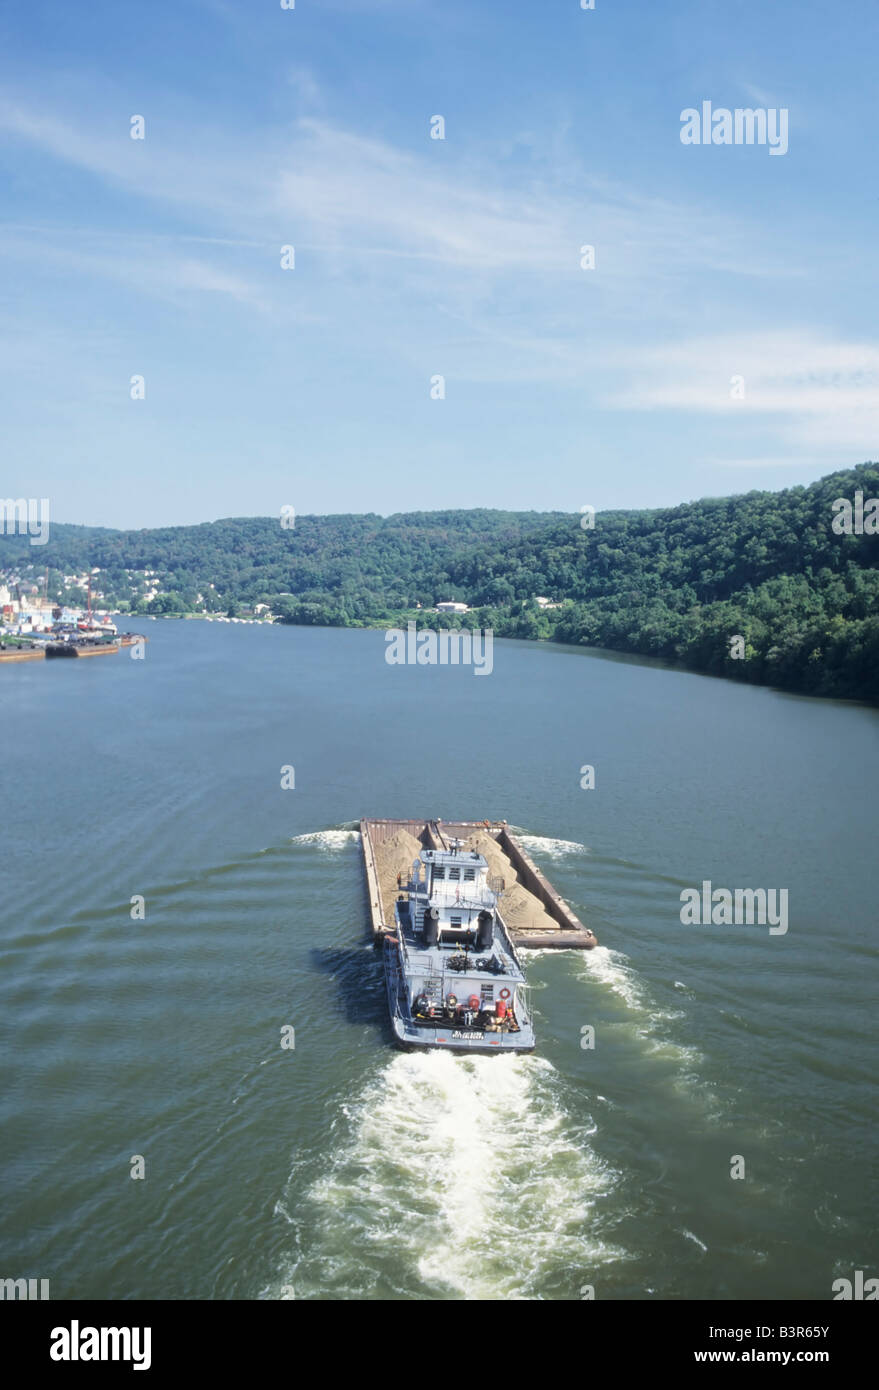 River barge on Ohio River, boat, transportation, industry Ohio - West Virginia border, Power Alley. Stock Photo